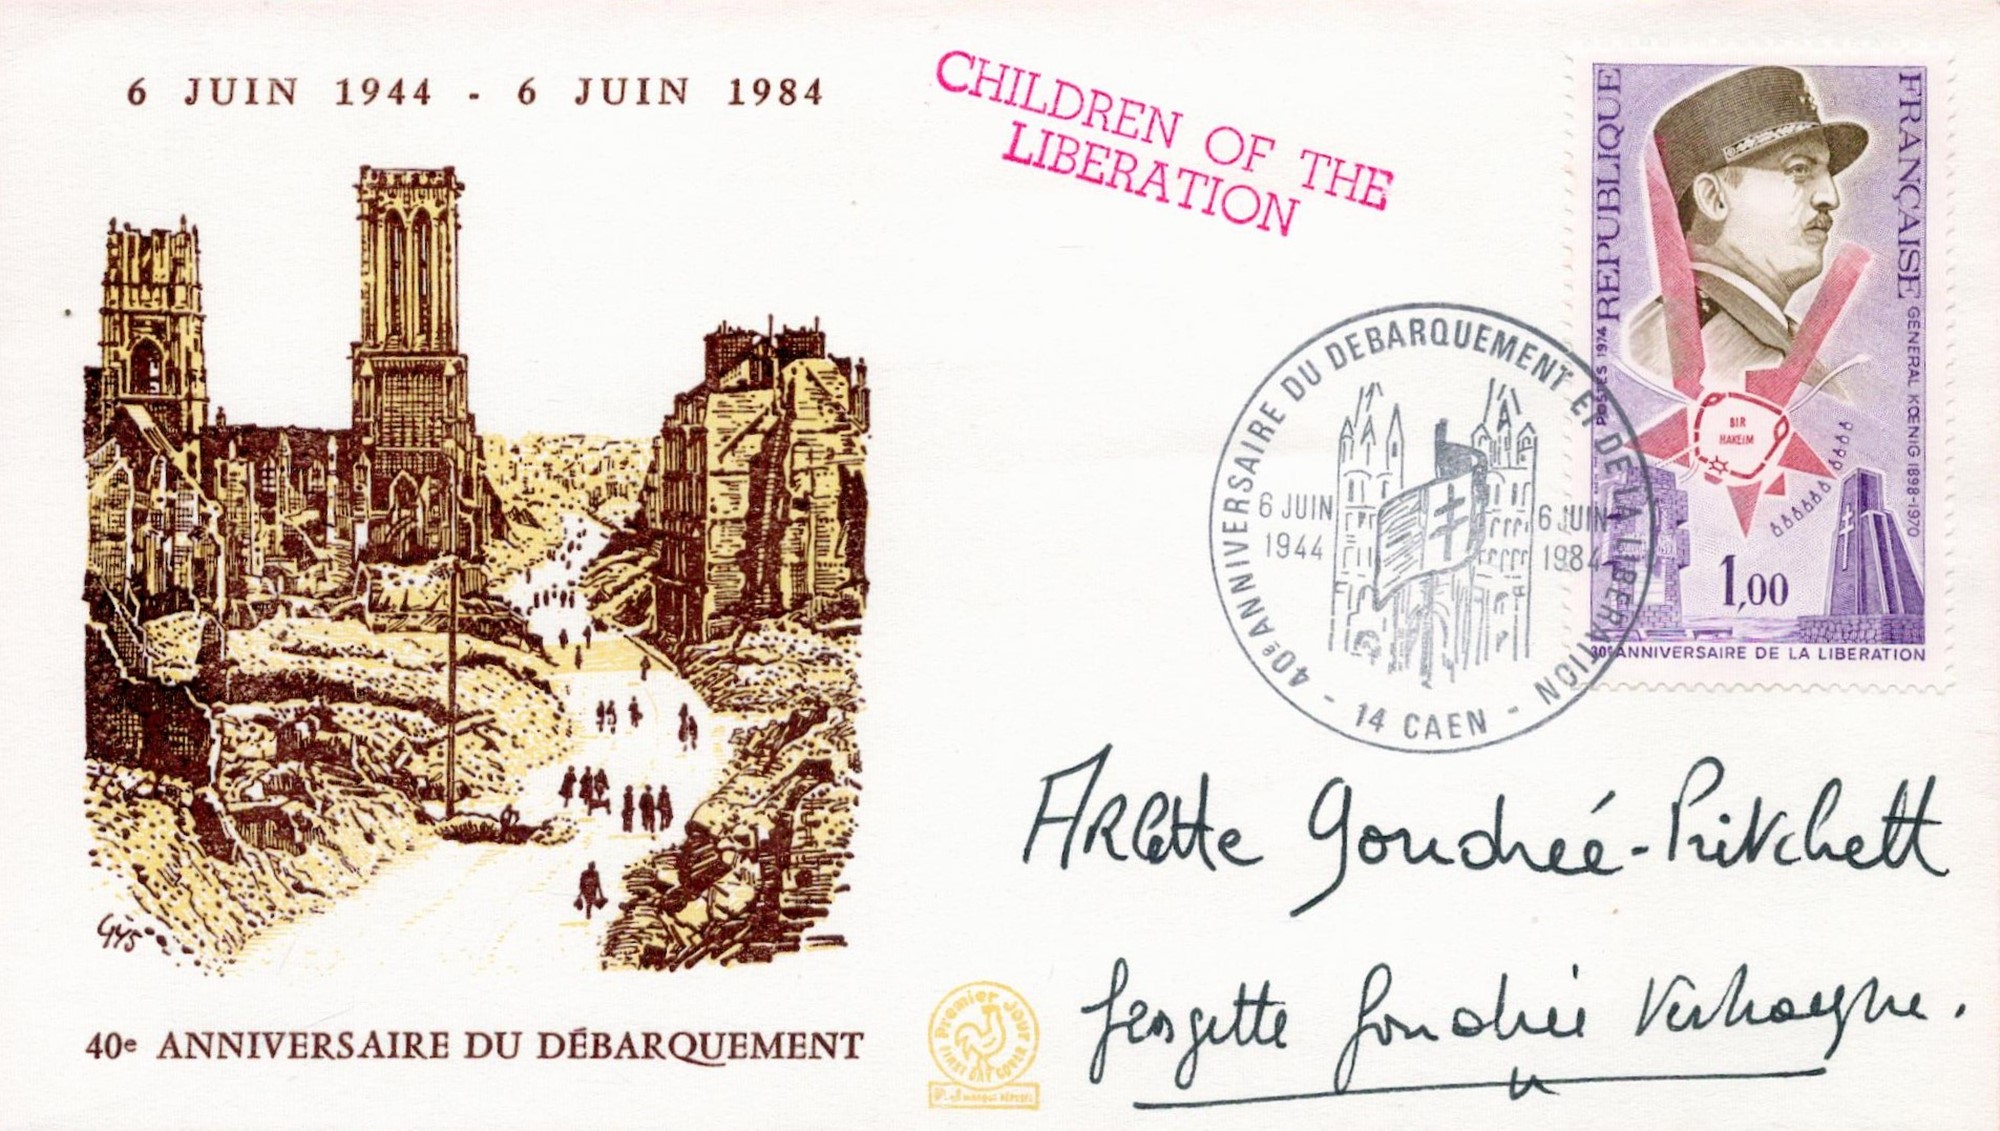 Arlette Gondree Pritchett signed Children of the Liberation 40th Anniversary FDC Owner of the